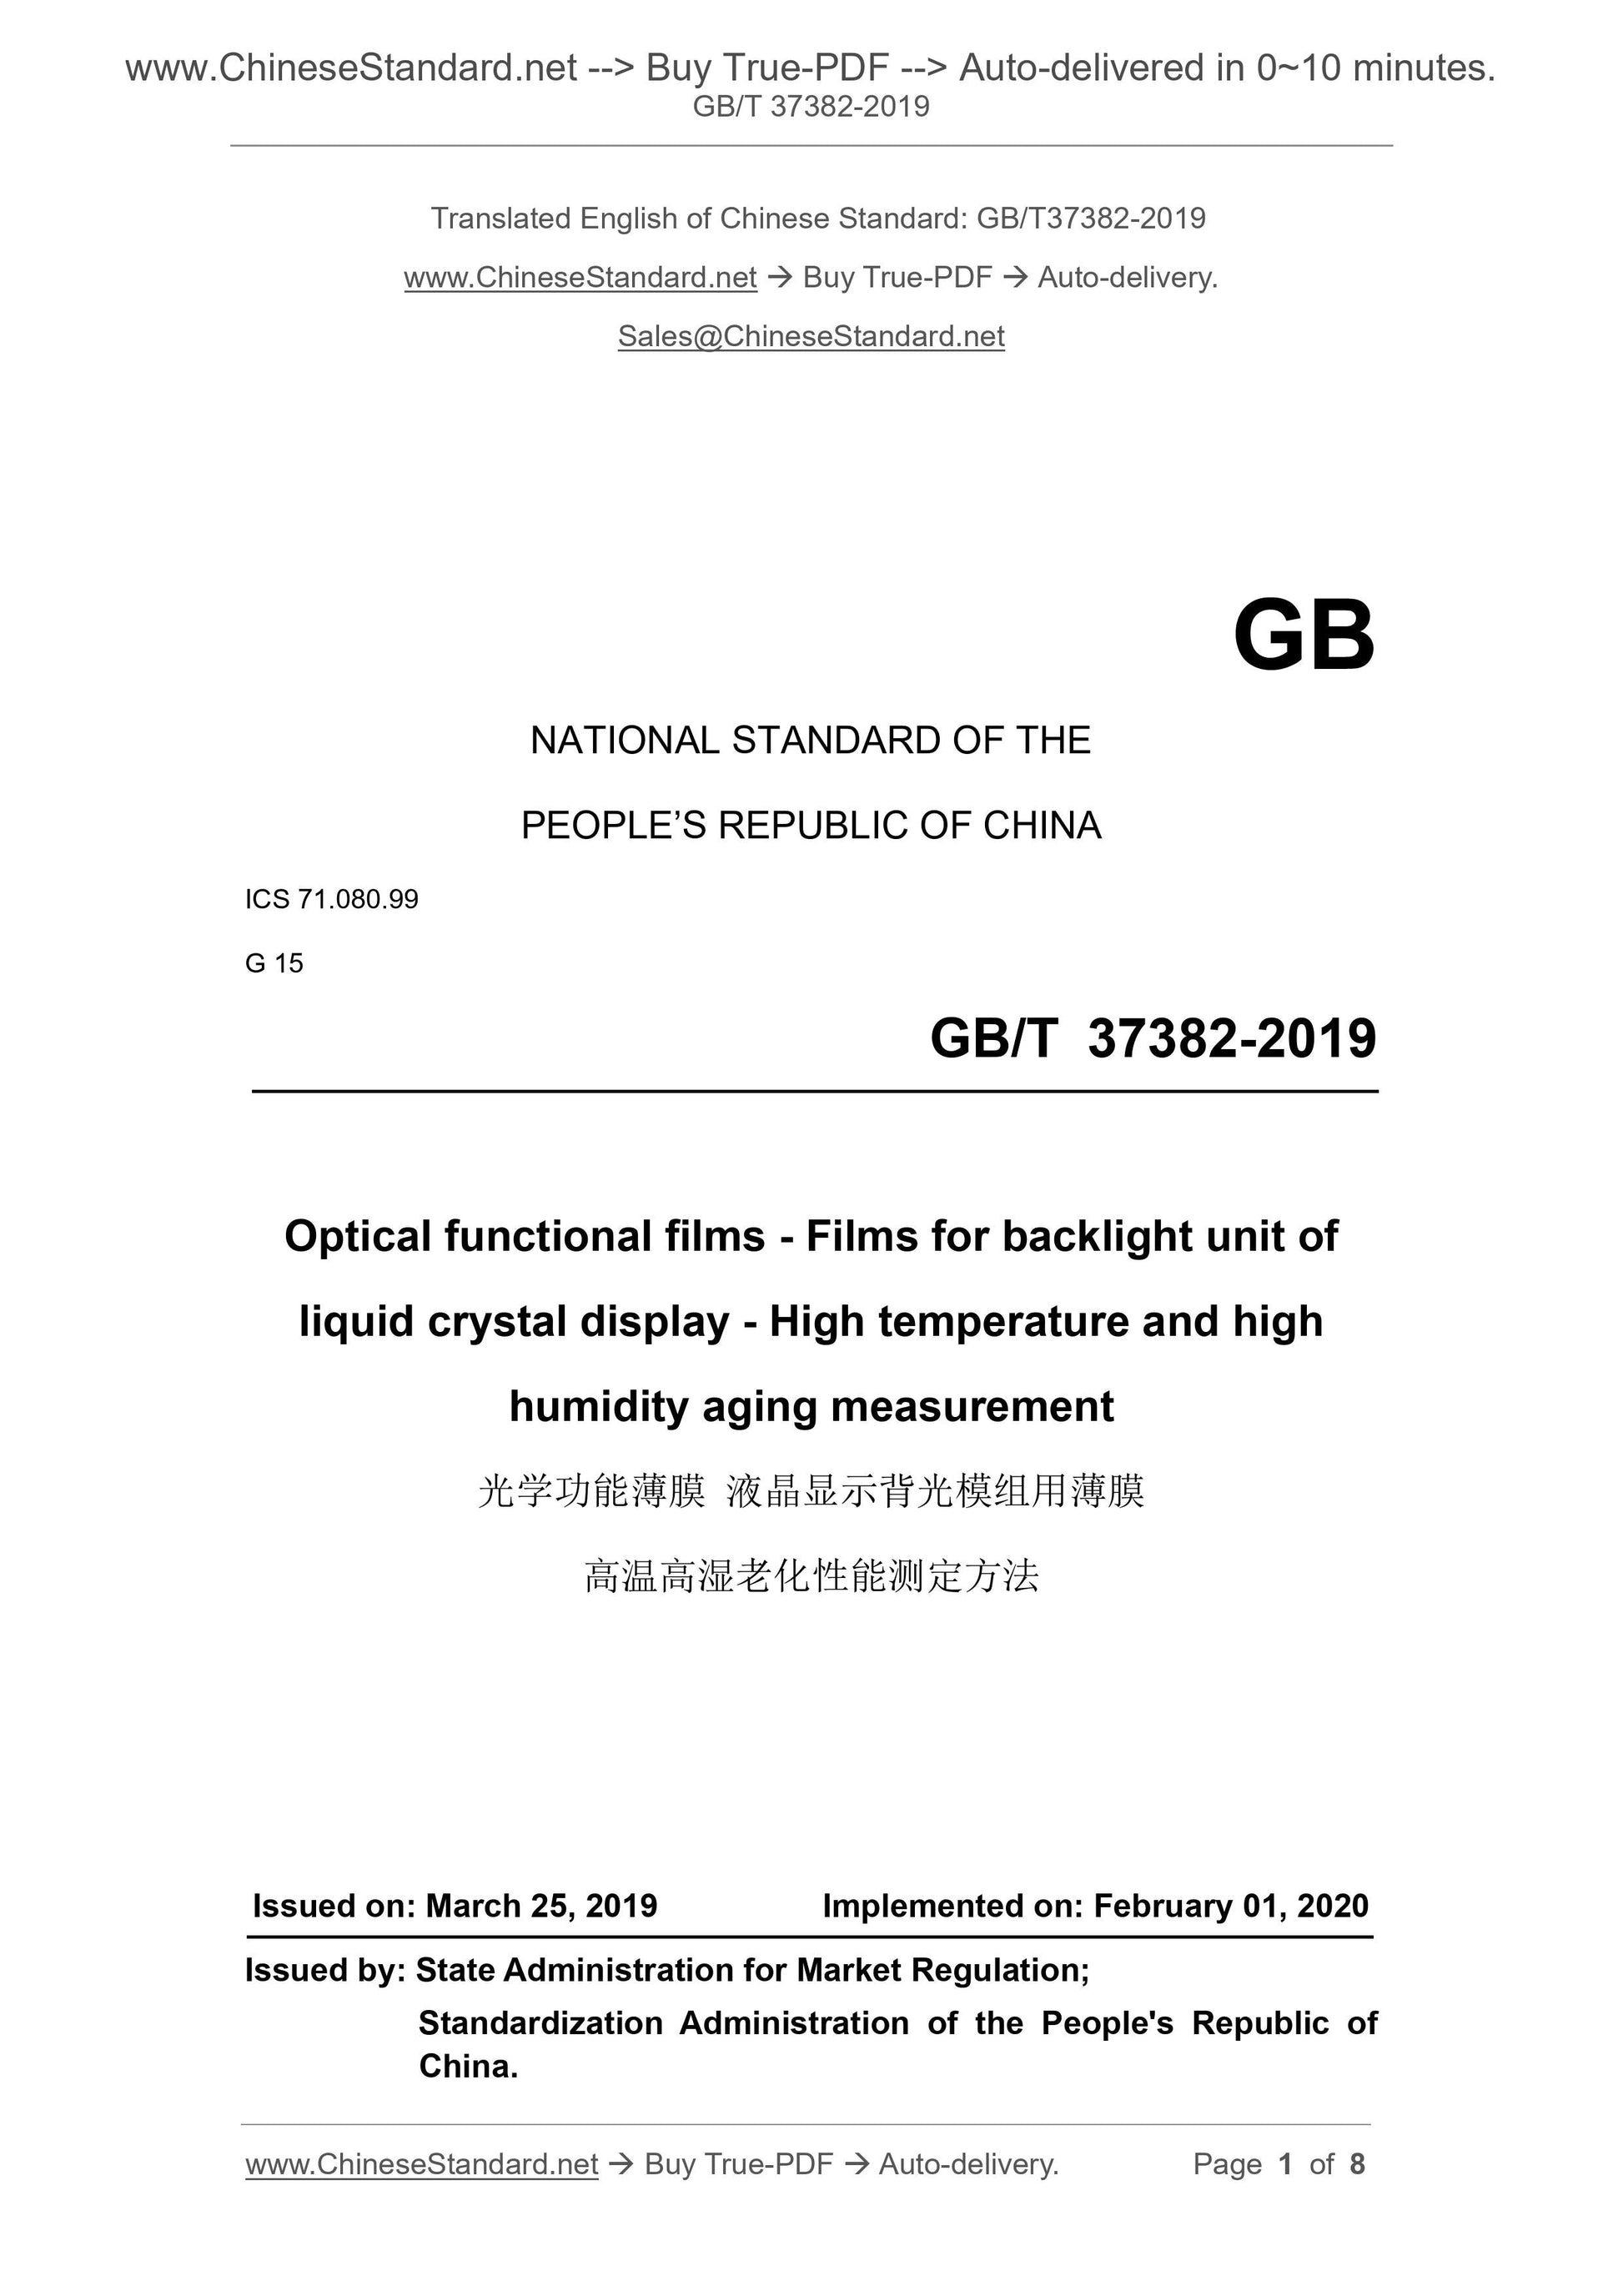 GB/T 37382-2019 Page 1